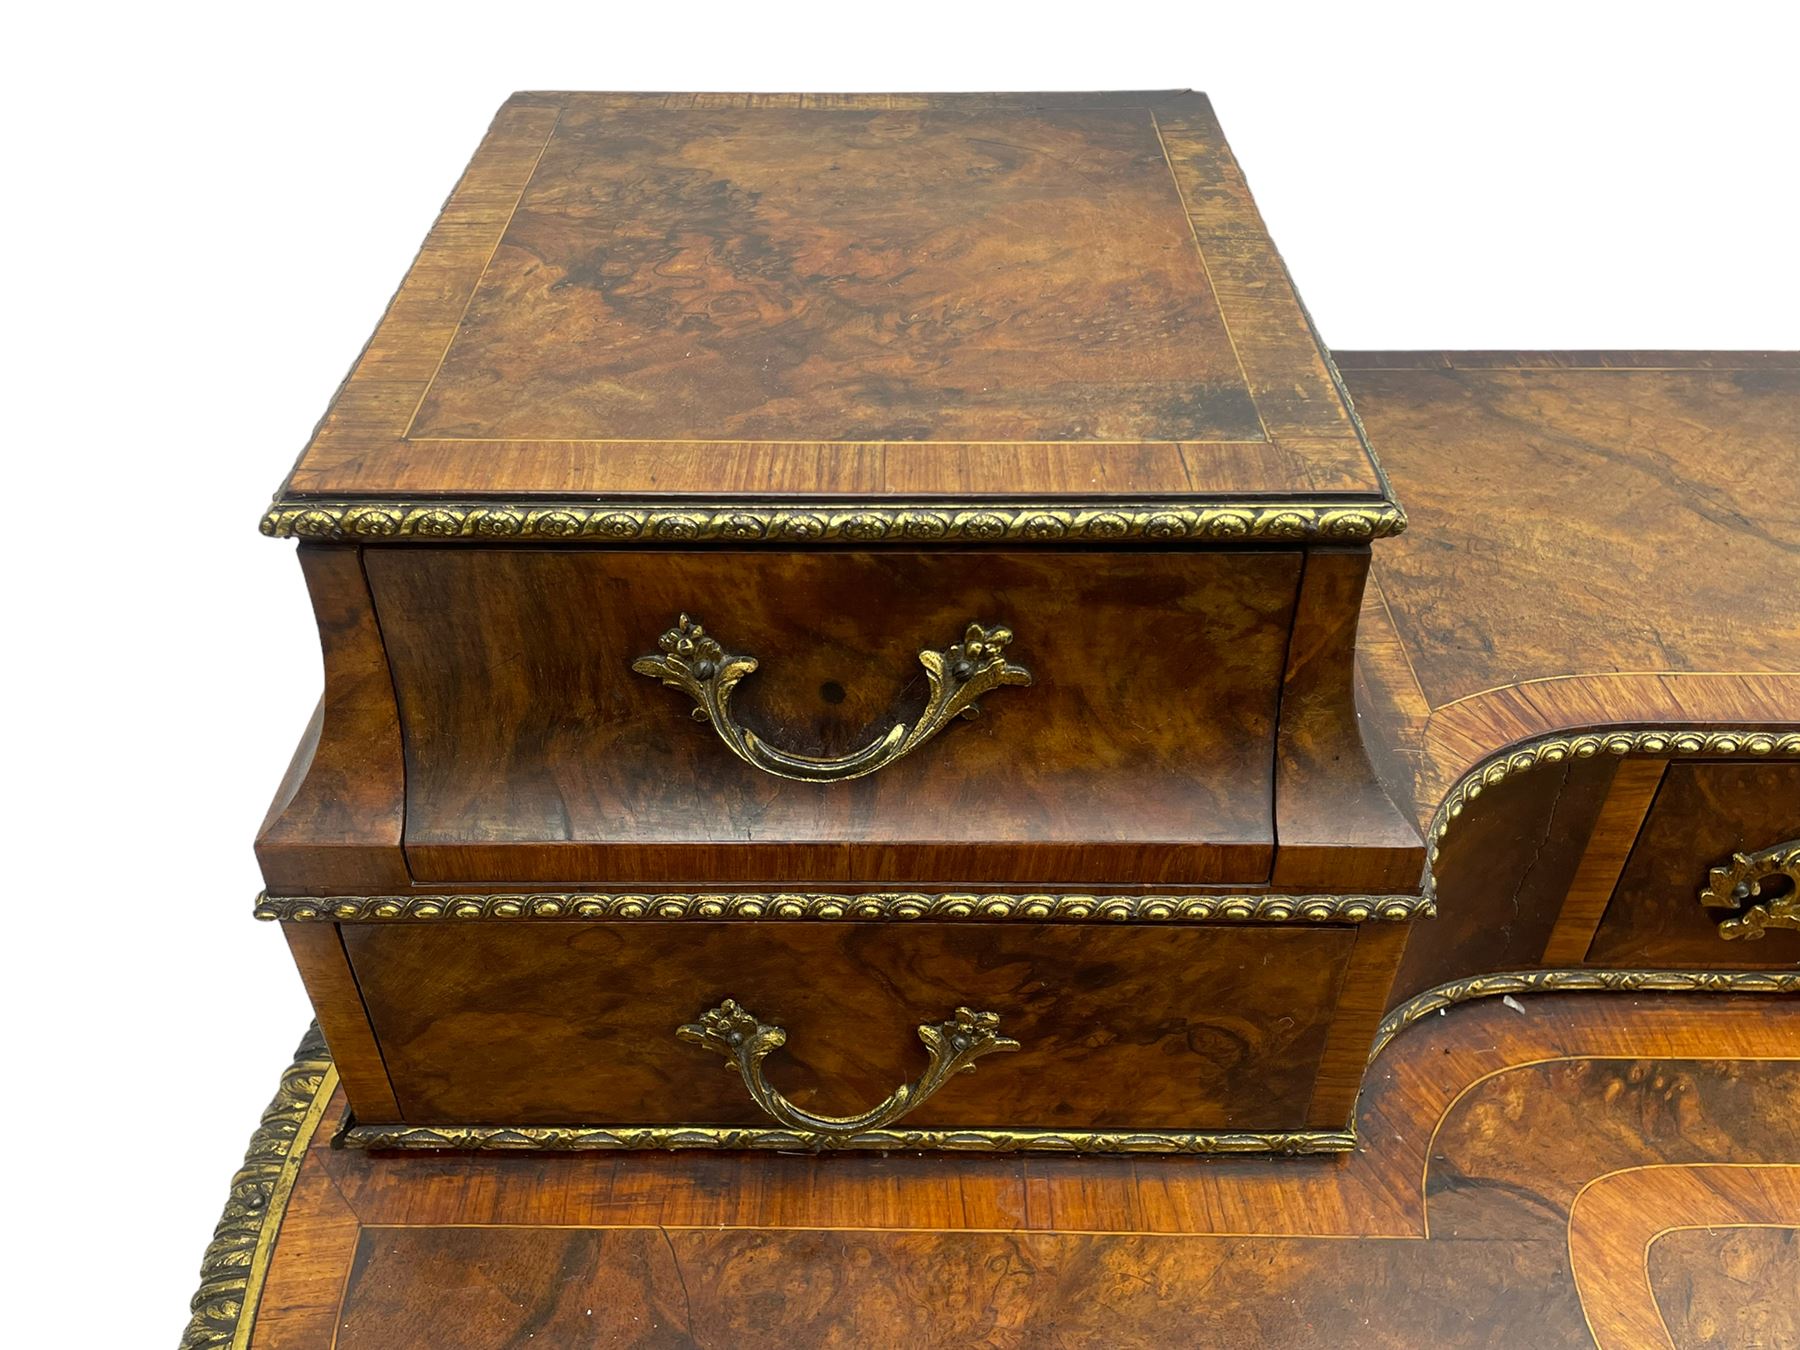 Late 19th to early 20th century French figured walnut writing desk - Image 8 of 13